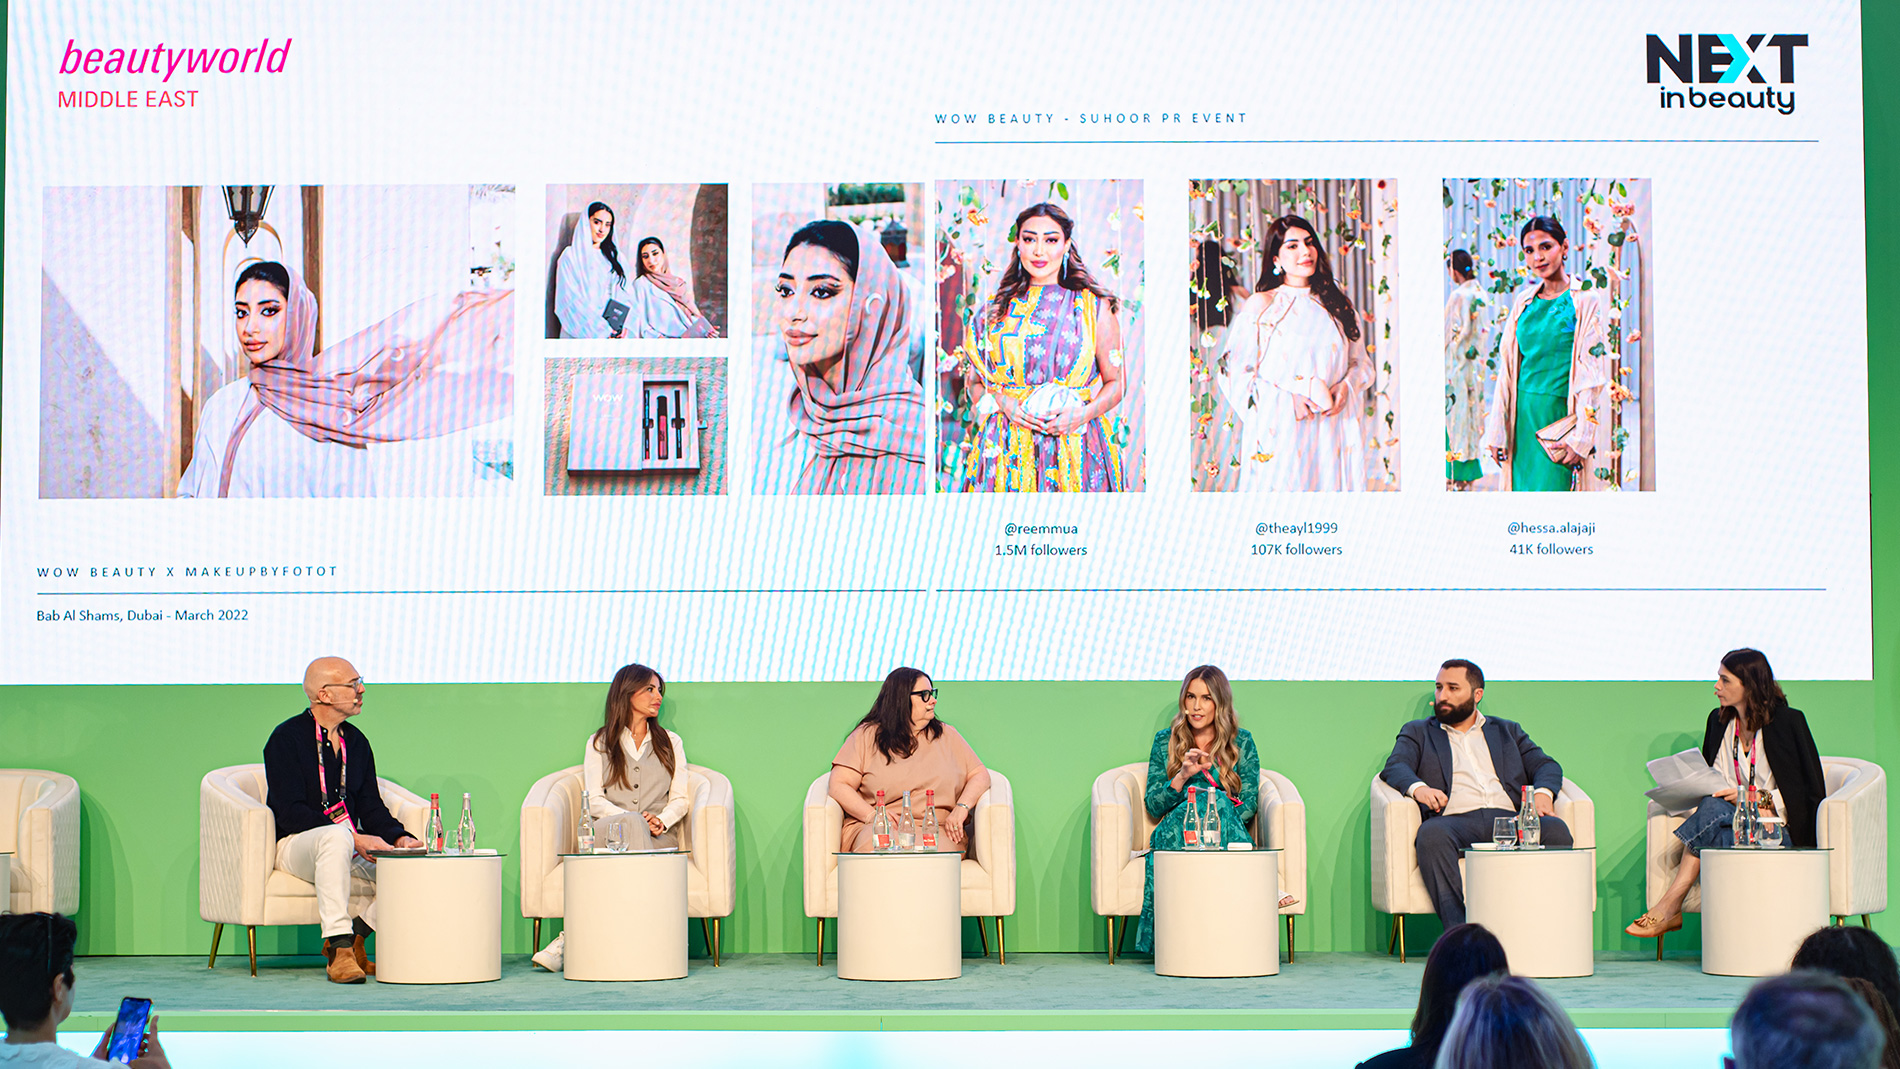 Beautyworld Middle East - Next in Beauty Conference